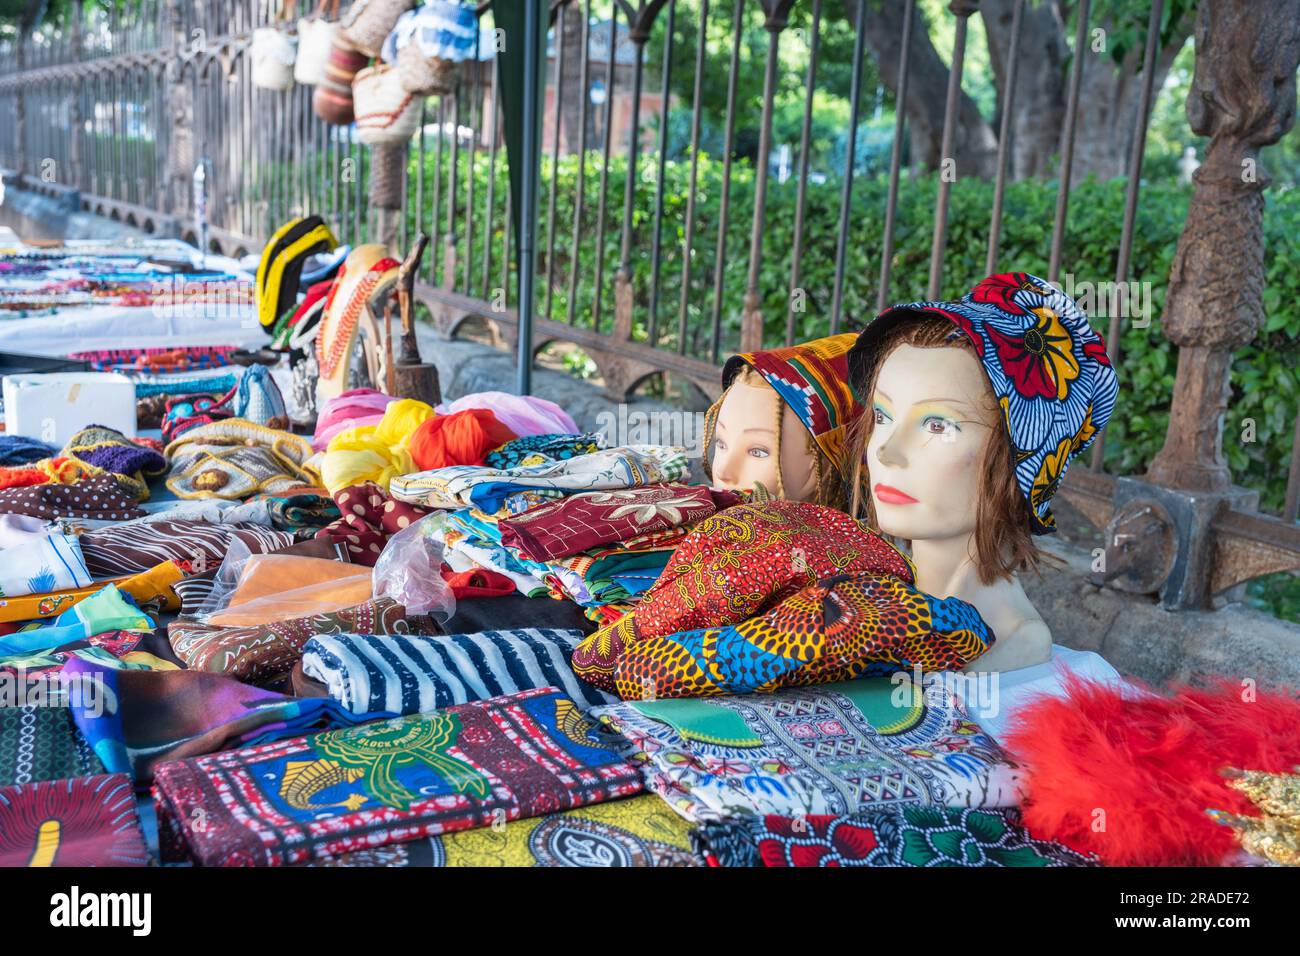 Colorful used accessories for women's clothing at a flea market in Palermo Stock Photo